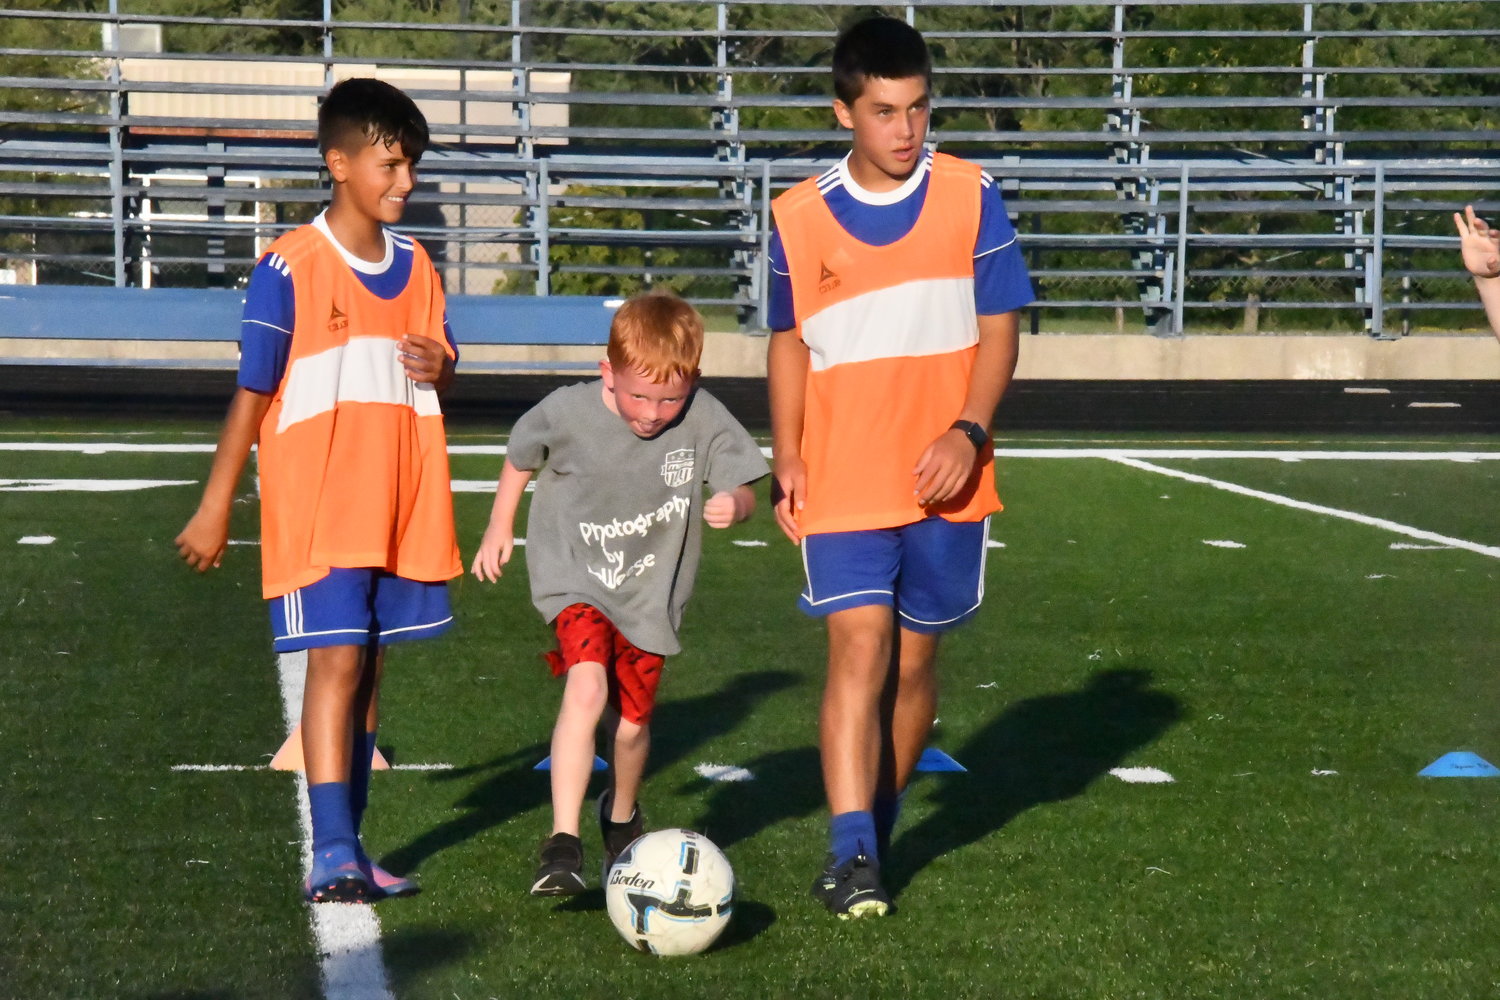 Caden Lucas, 6, dribbles a ball during the 3-on-3 soccer event, helped by two Moberly High School players.